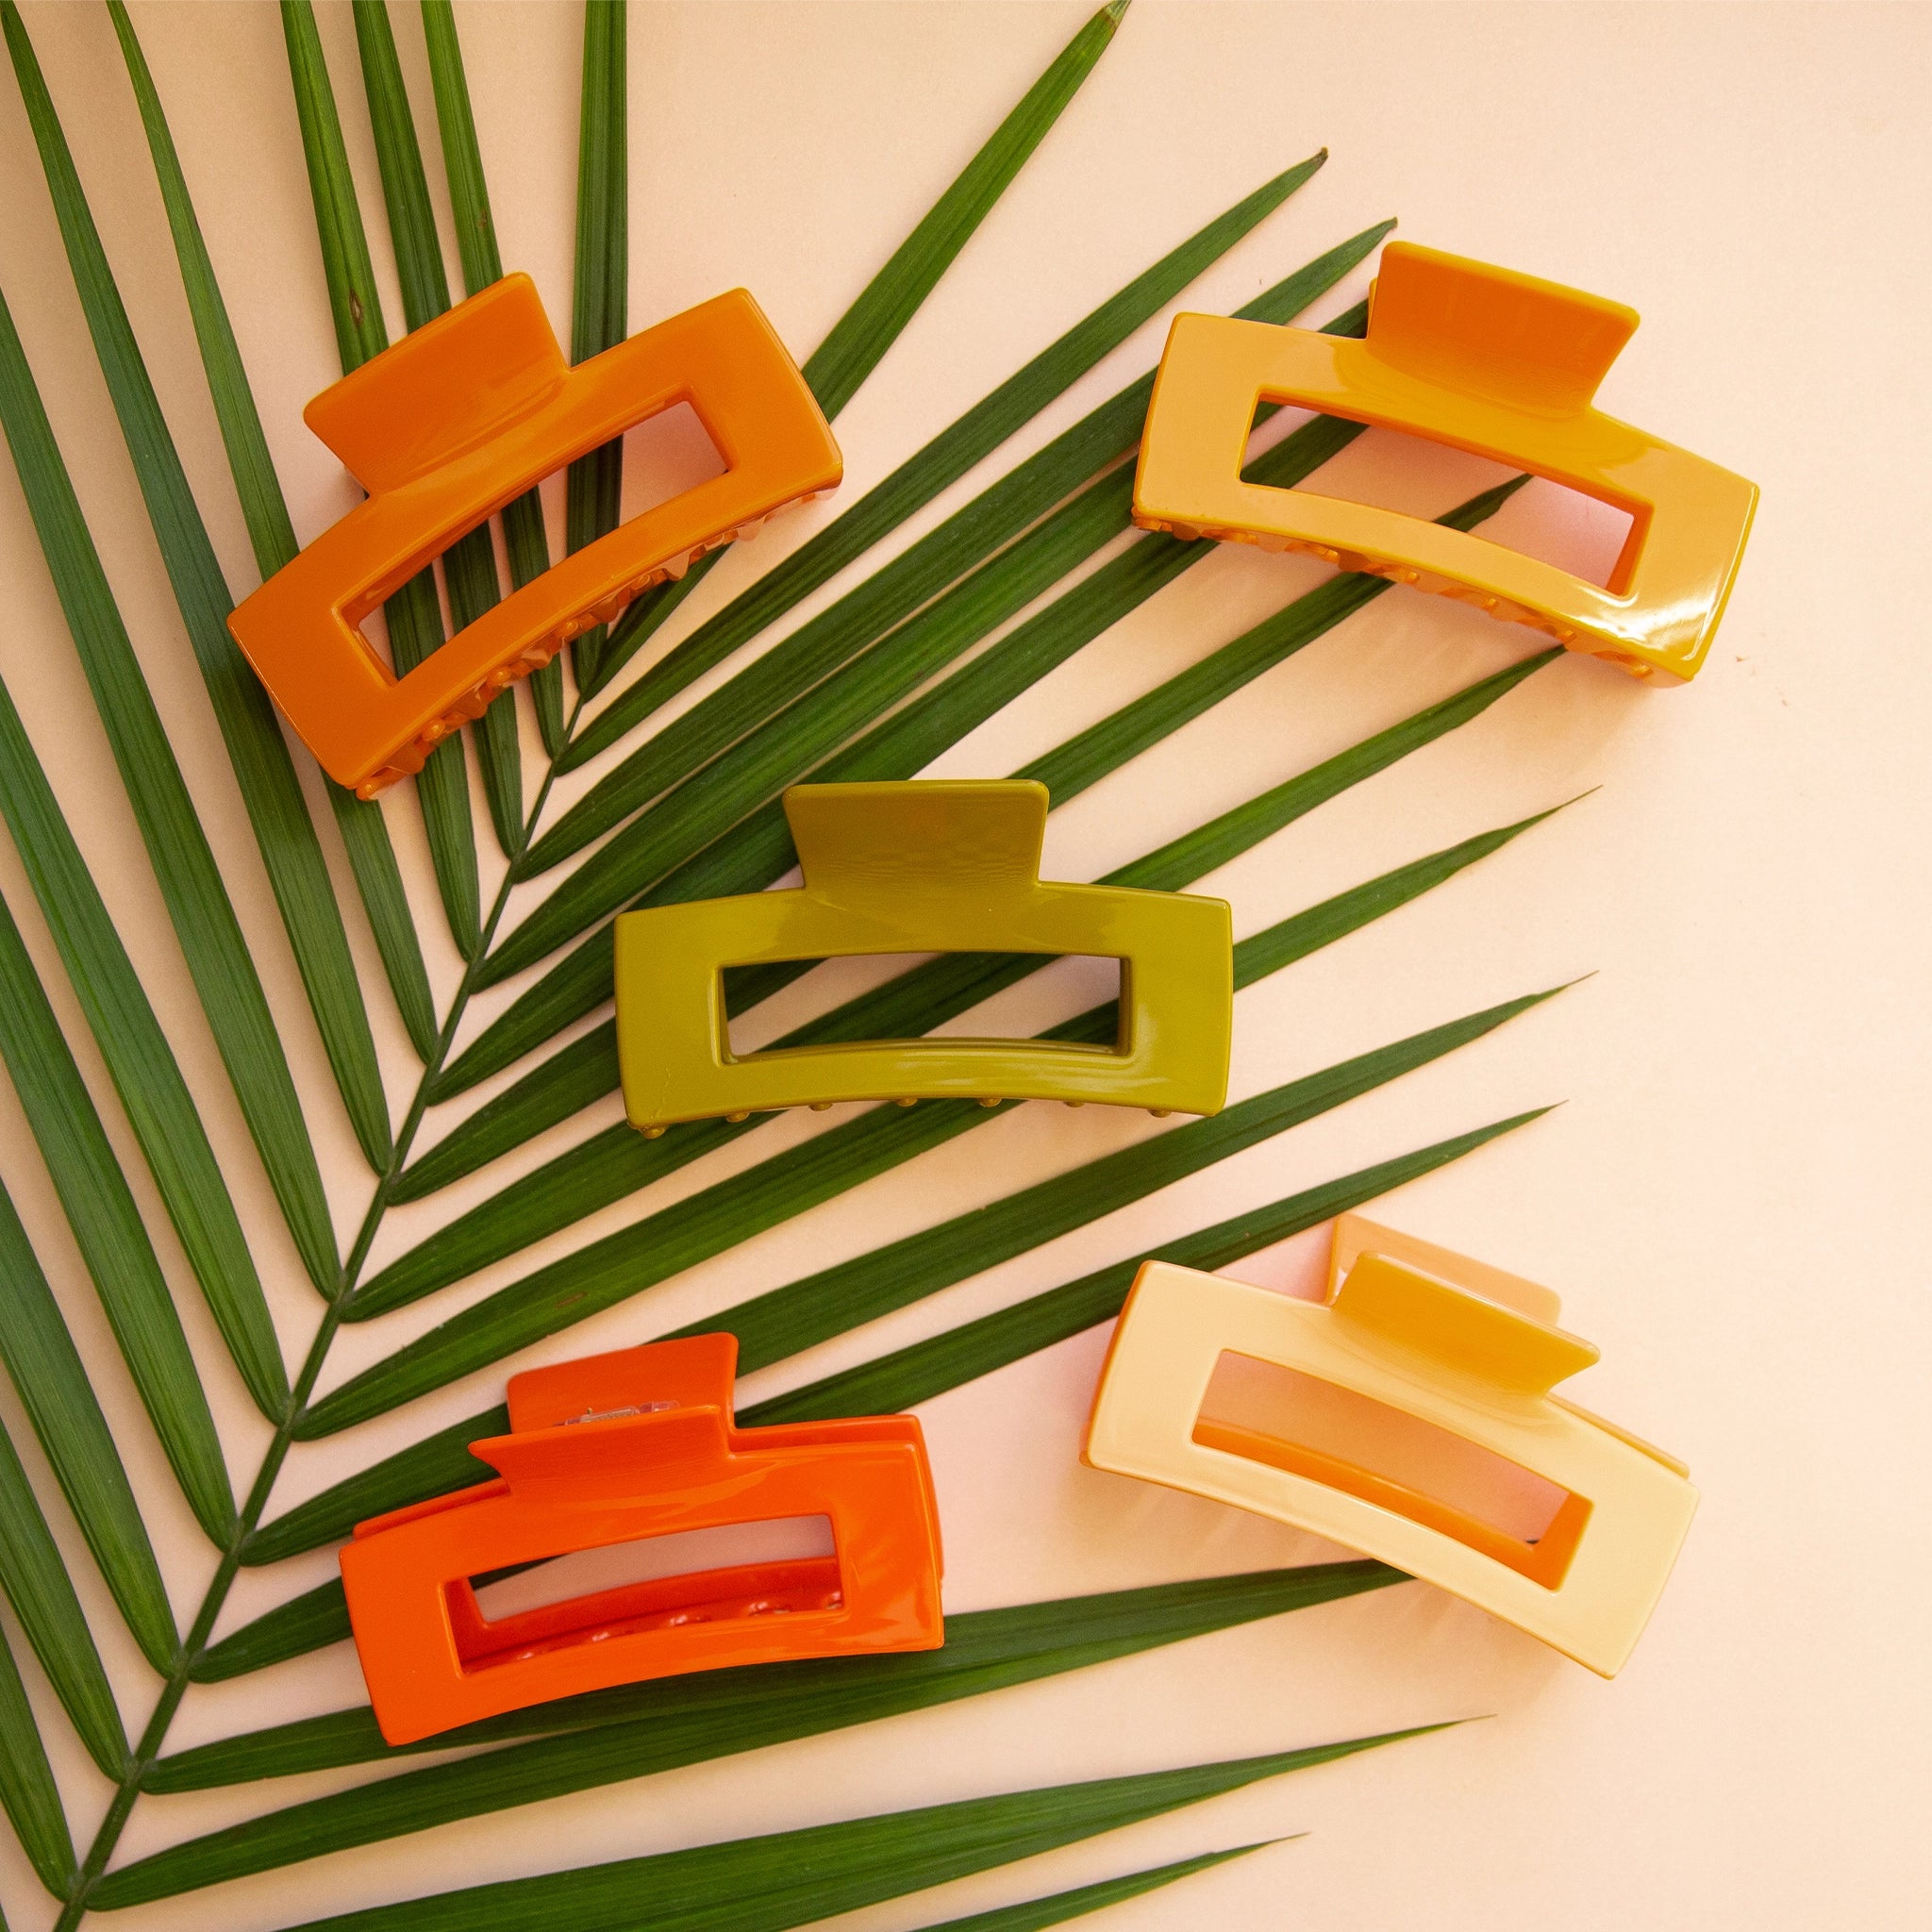 On a peachy background is a variety of rectangle claw clips in different colors on a green palm leaf.